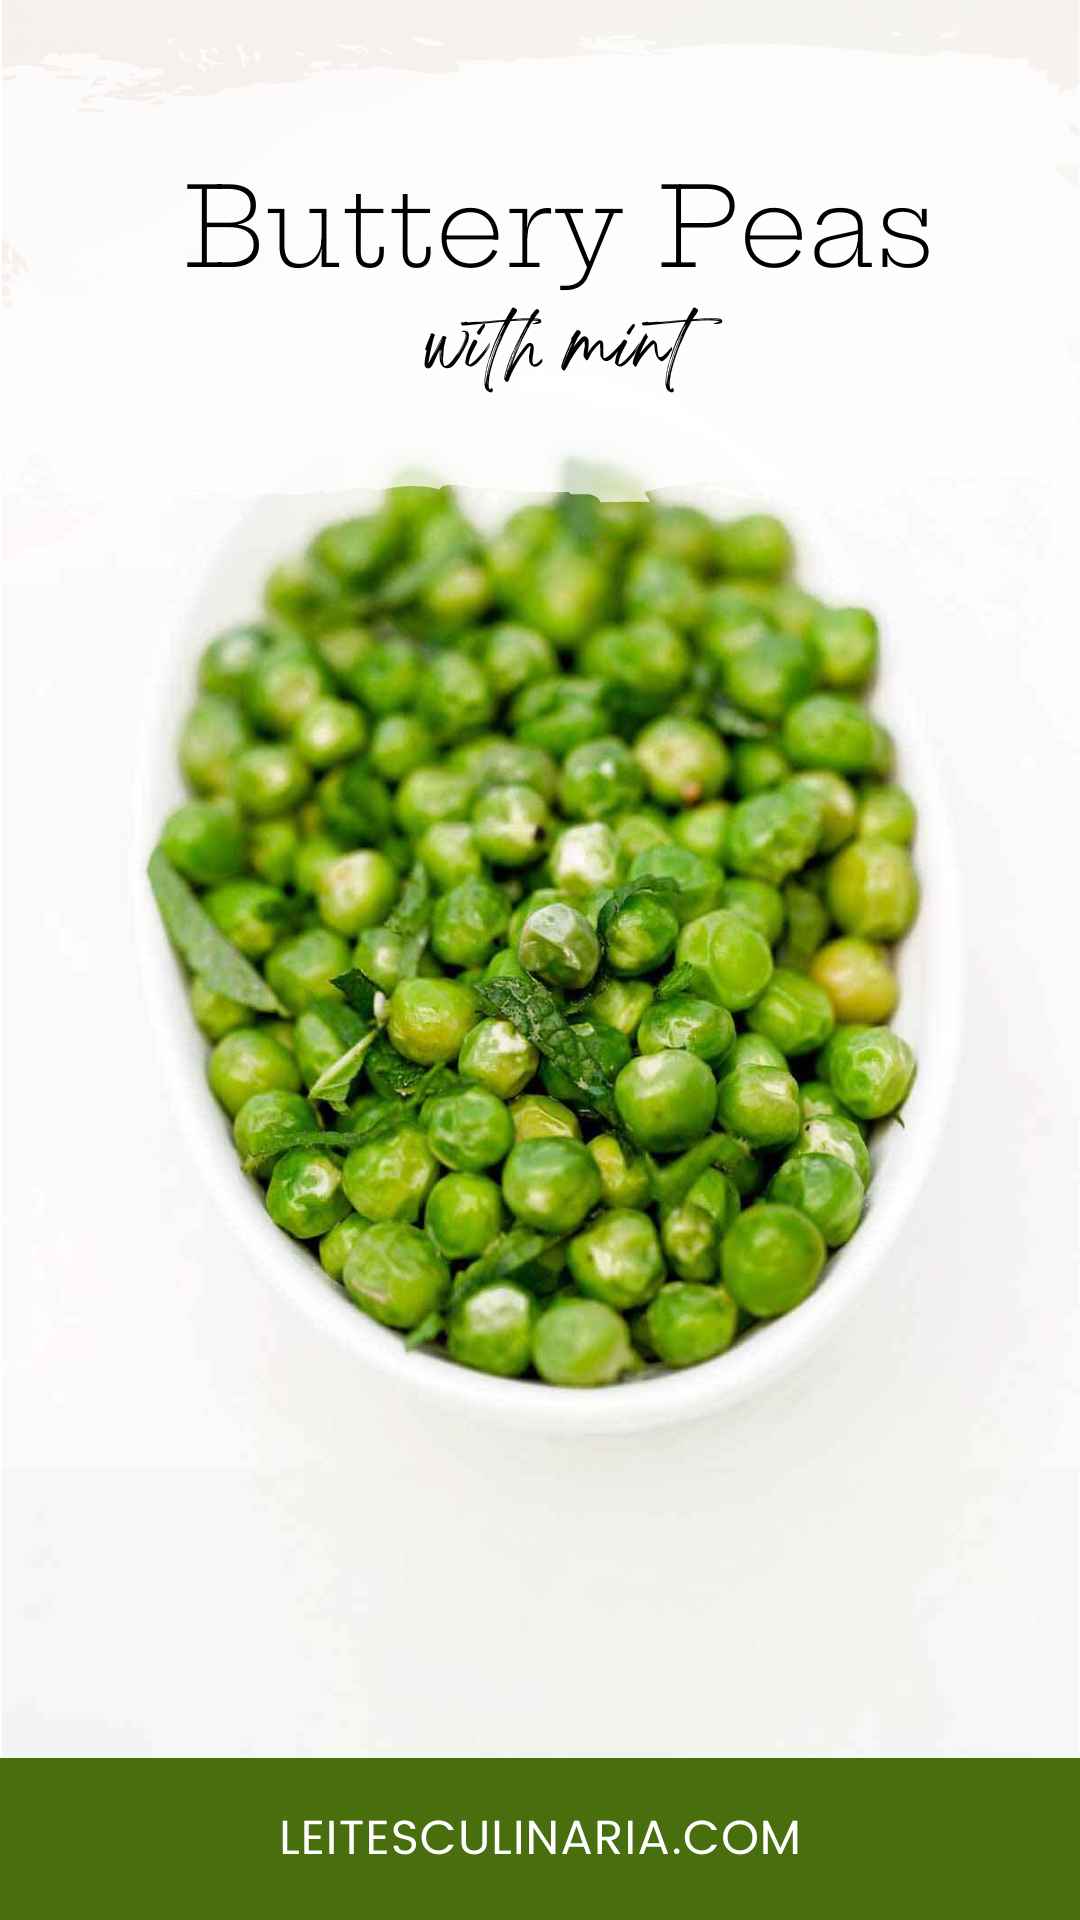 A bowl of fresh peas garnished with torn mint leaves.